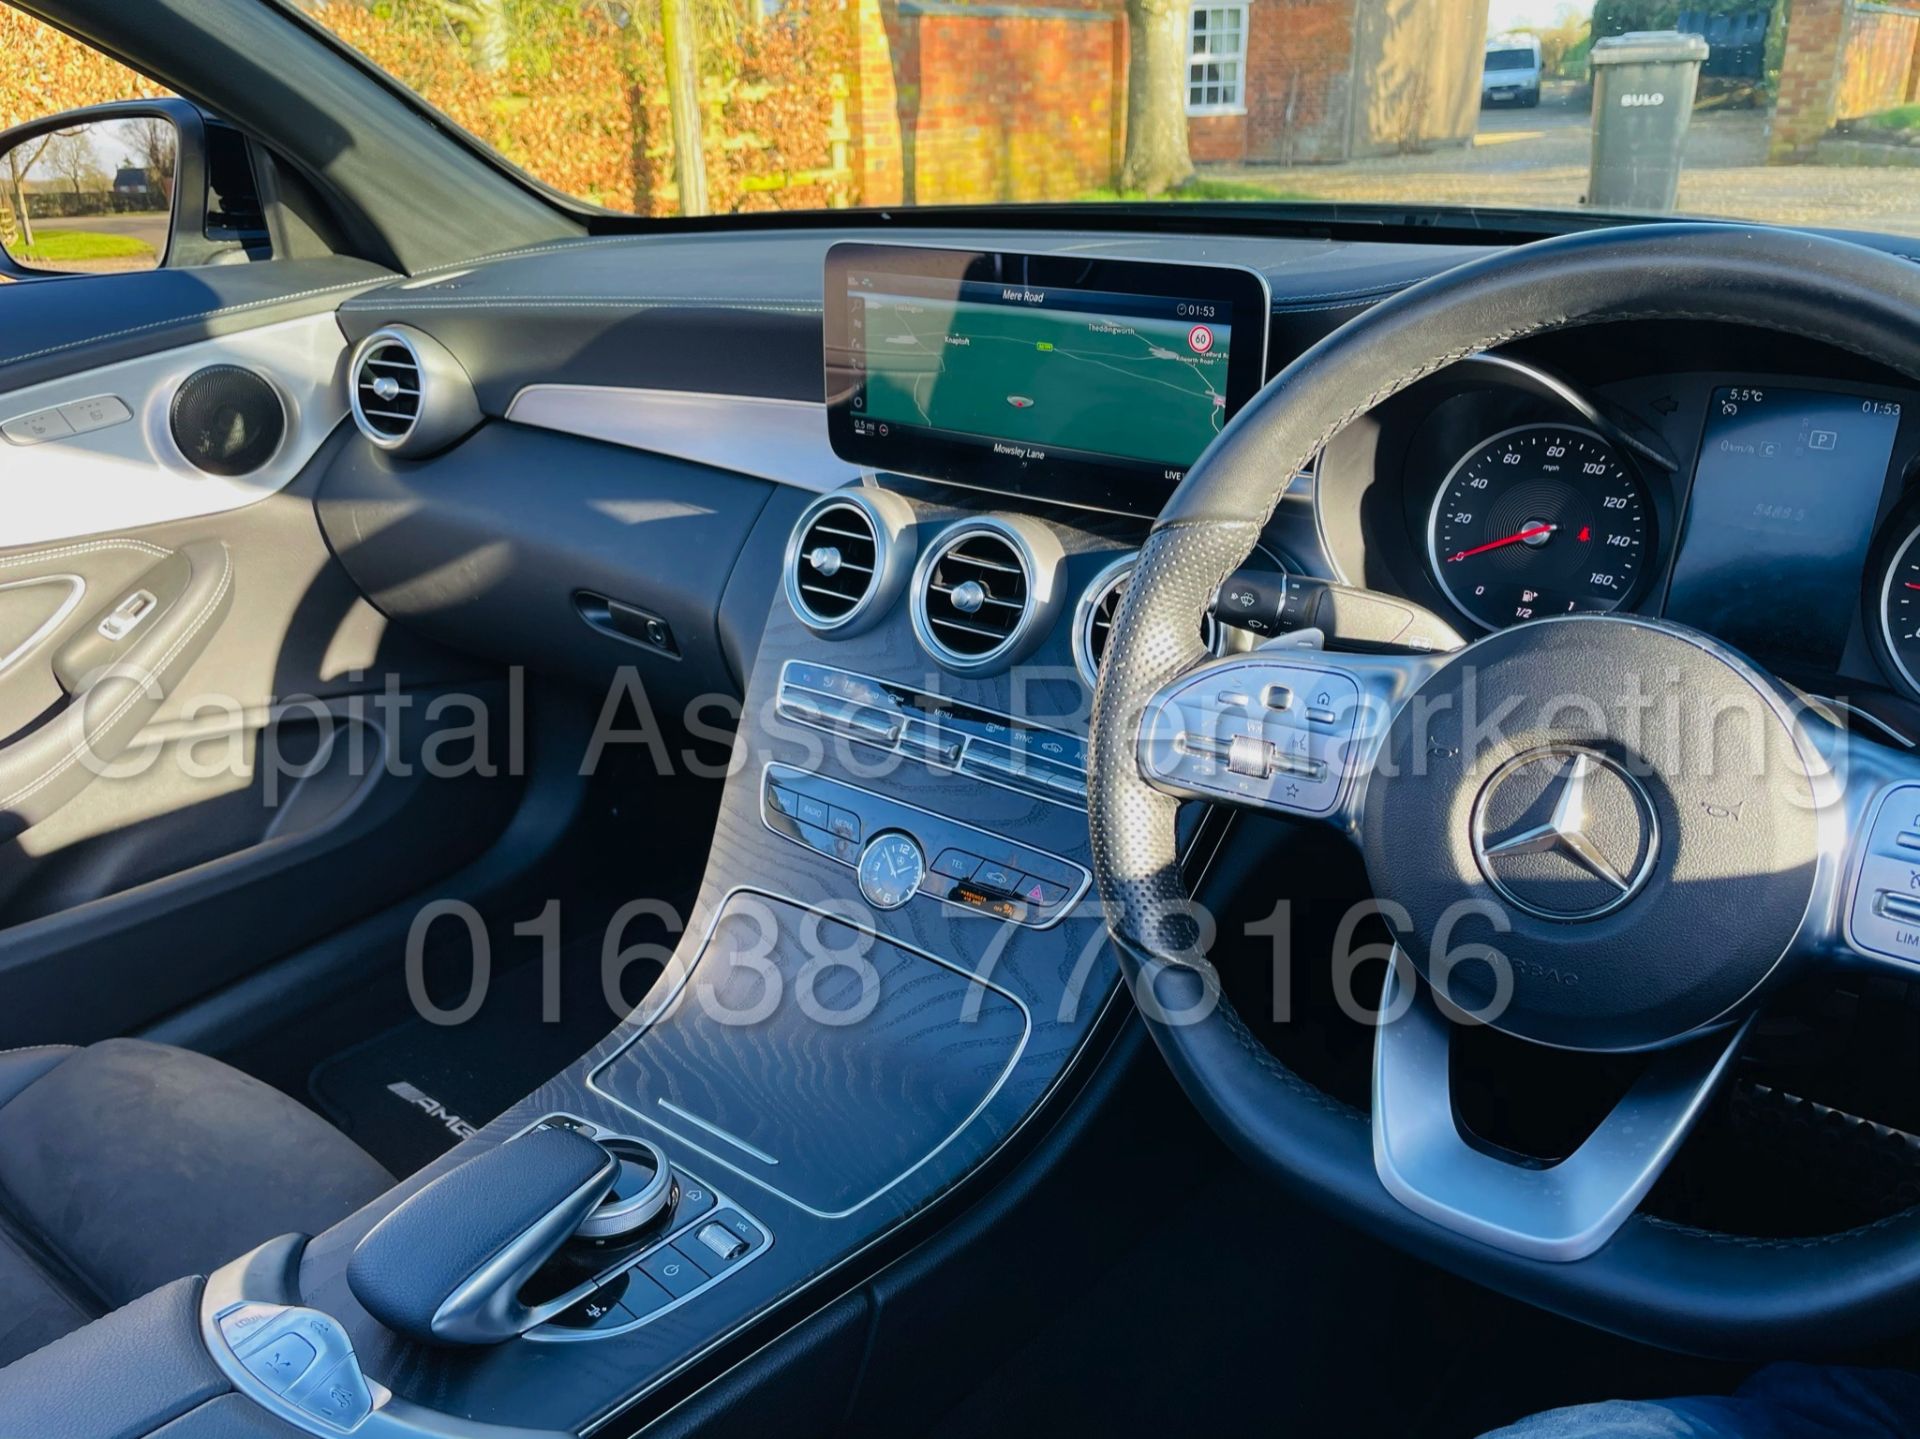 ON SALE MERCEDES-BENZ C220D *AMG LINE - CABRIOLET* (2019) '9G TRONIC AUTO - LEATHER - SAT NAV' - Image 48 of 59